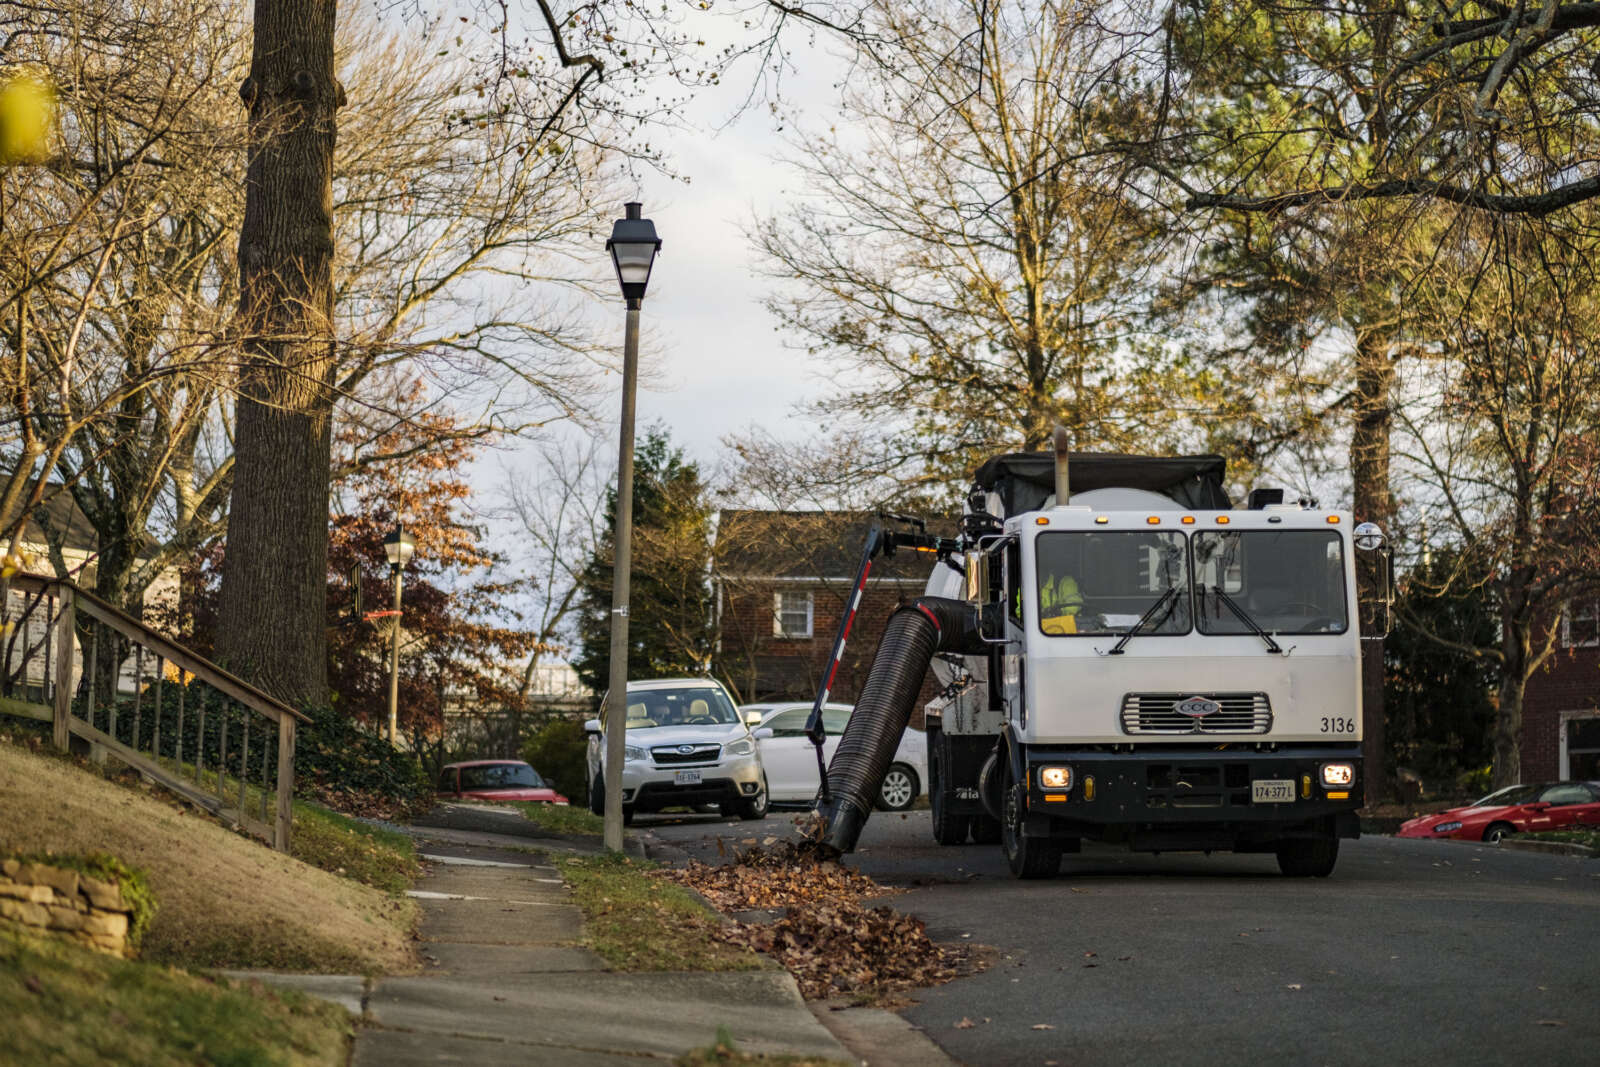 Second leaf collection pass to start tomorrow after slight weather delay | ARLnow.com